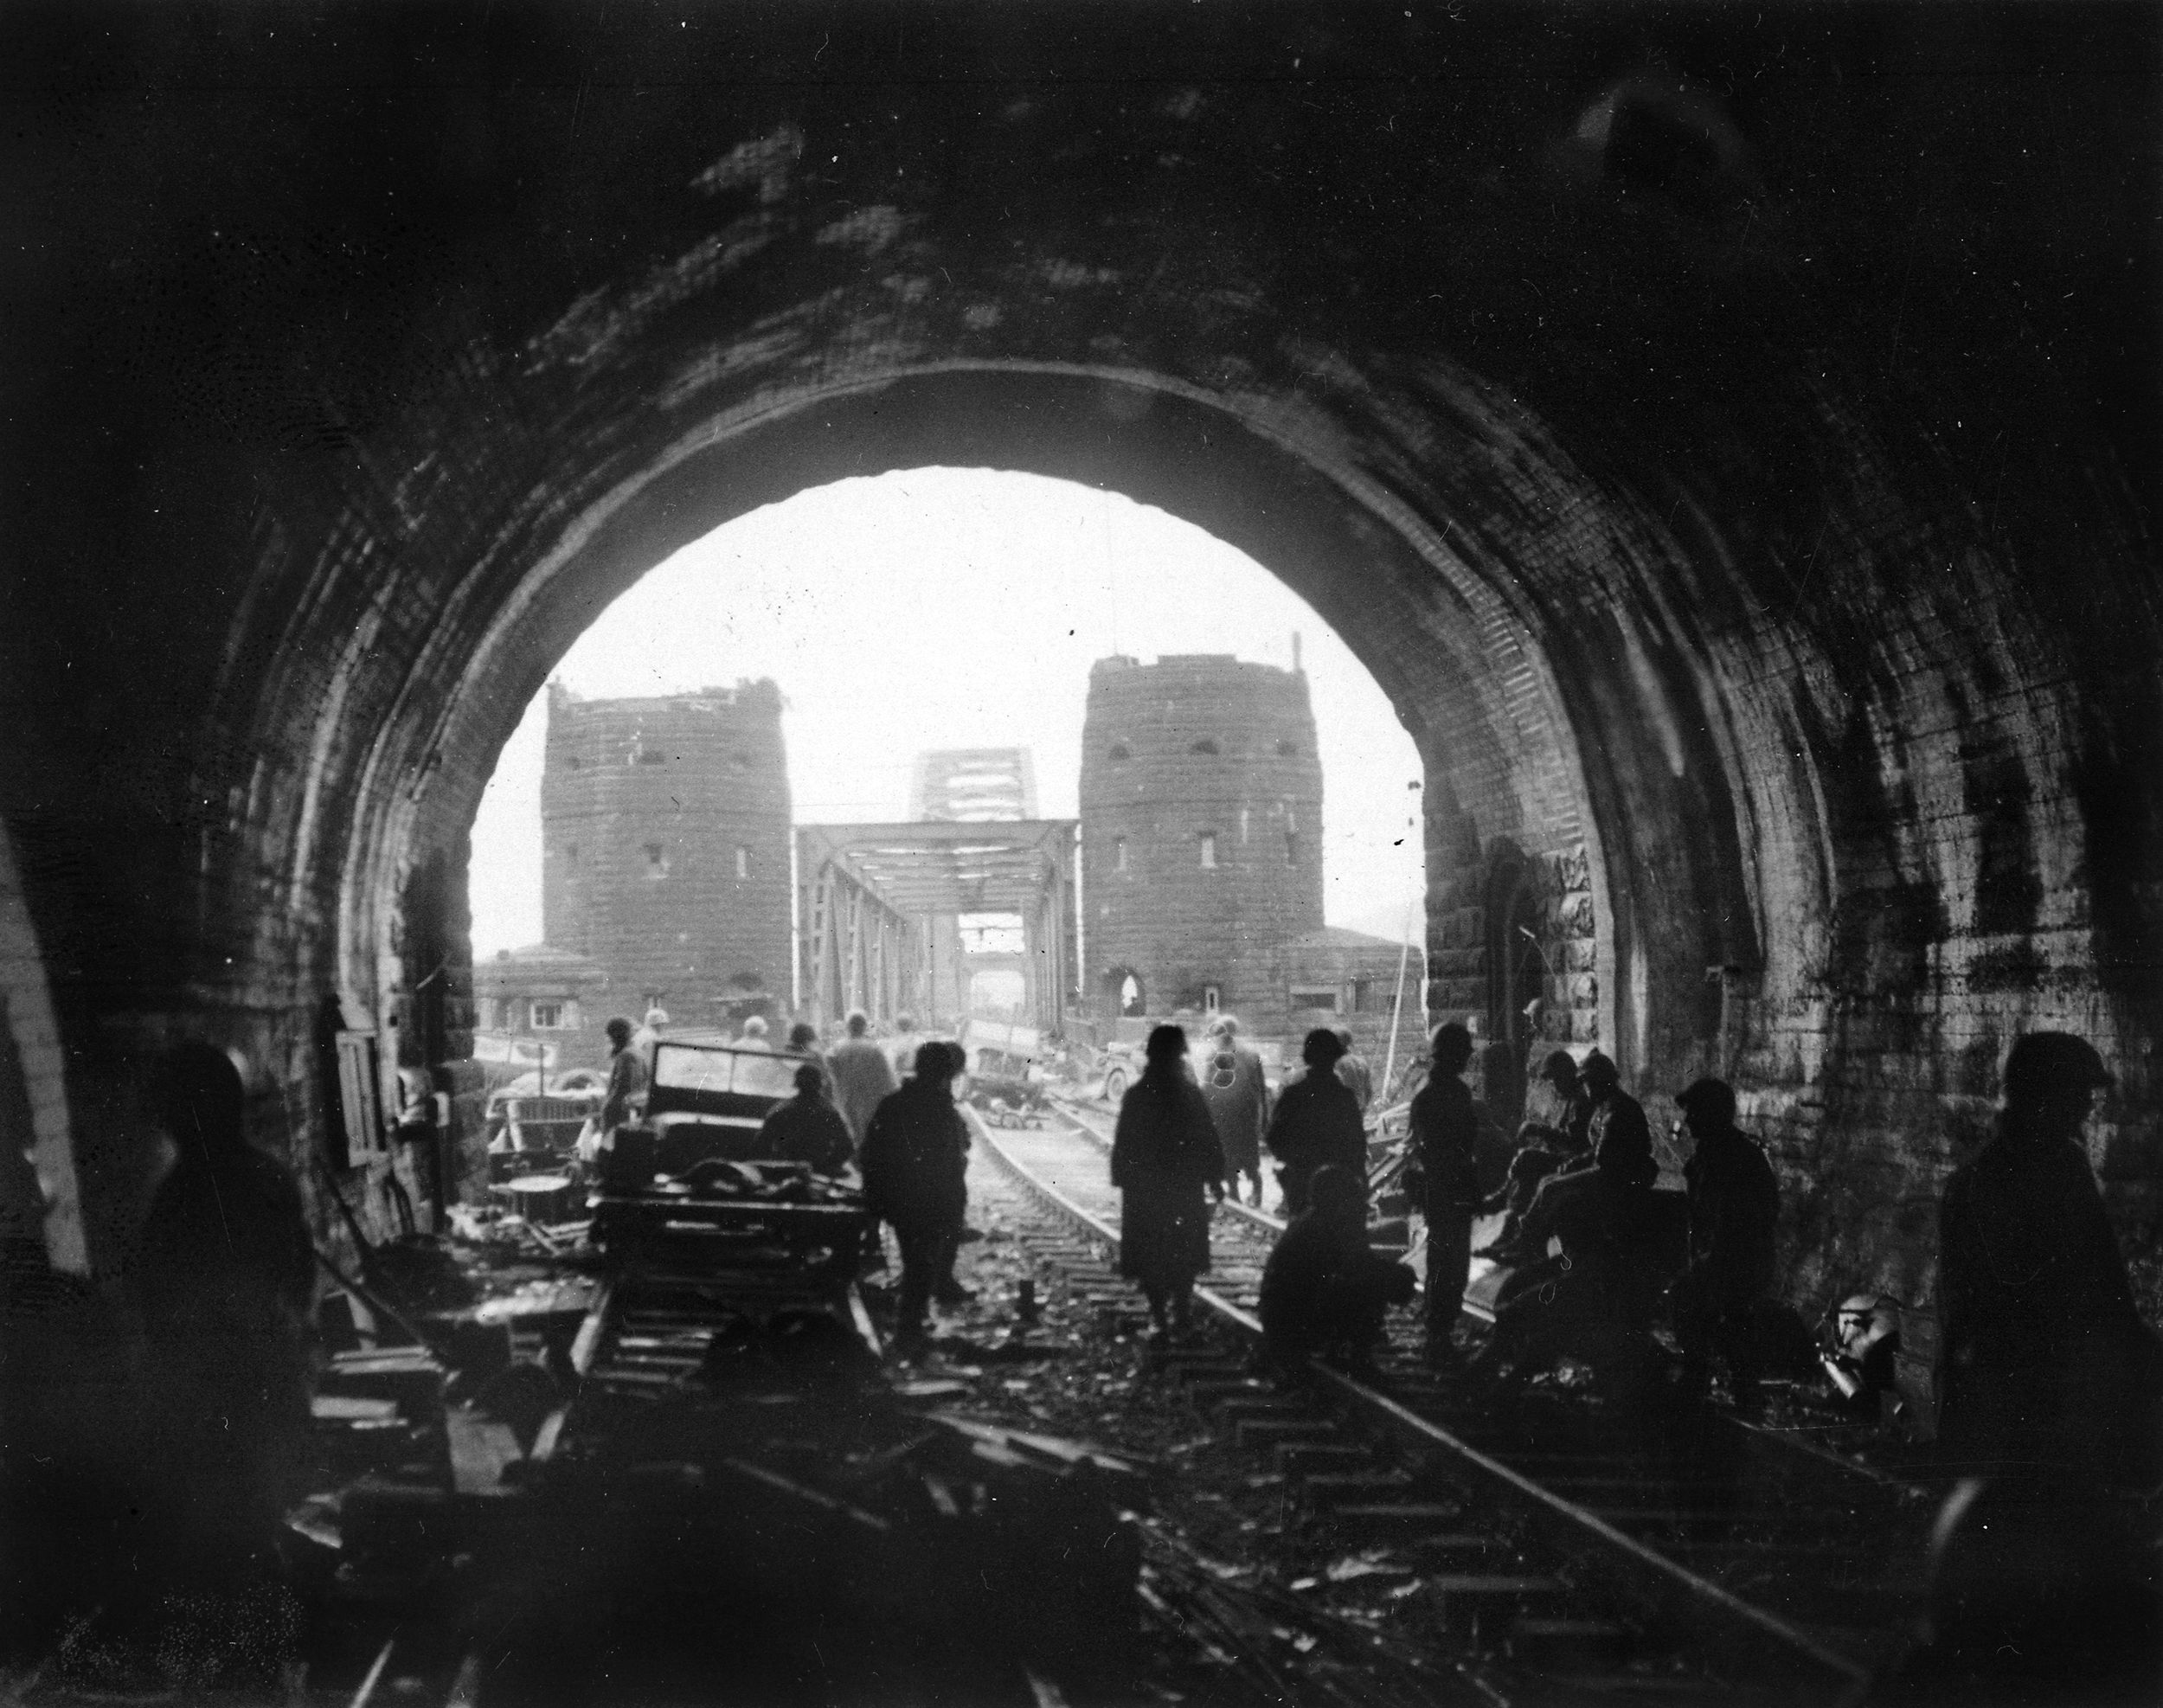 Men and equipment of the First U.S. Army  in the Erpeler Ley tunnel on the eastern side of  the Ludendorff railroad bridge over the Rhine River at Remagen Germany.  By 4 p.m., Lt. Karl Timmerman and his men had secured the bridge and the tunnel, not realizing it was more than 380 meters long and several hundred German civilians and soldiers were hiding deep in the darkness.